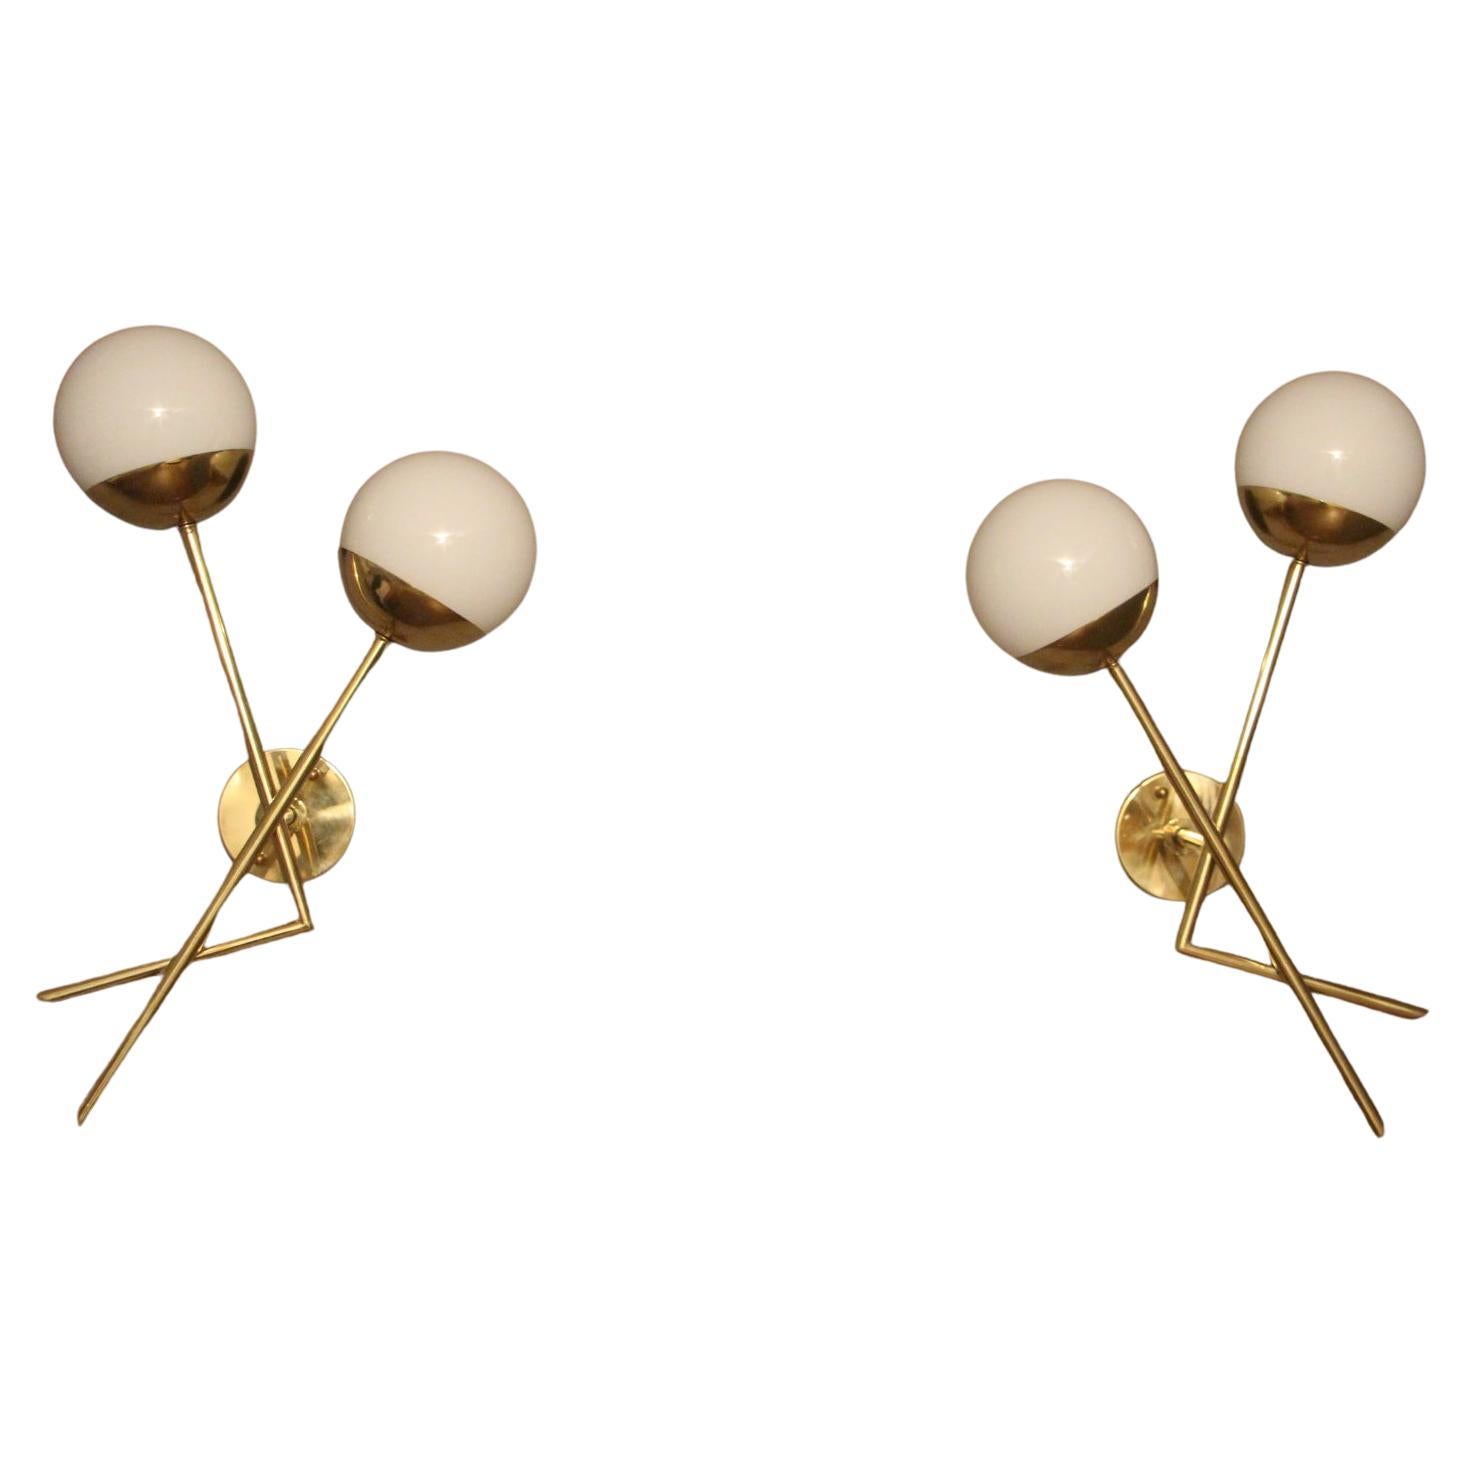 Pair of Sconces in White Murano Glass and Brass, Stilnovo Style Wall Lights